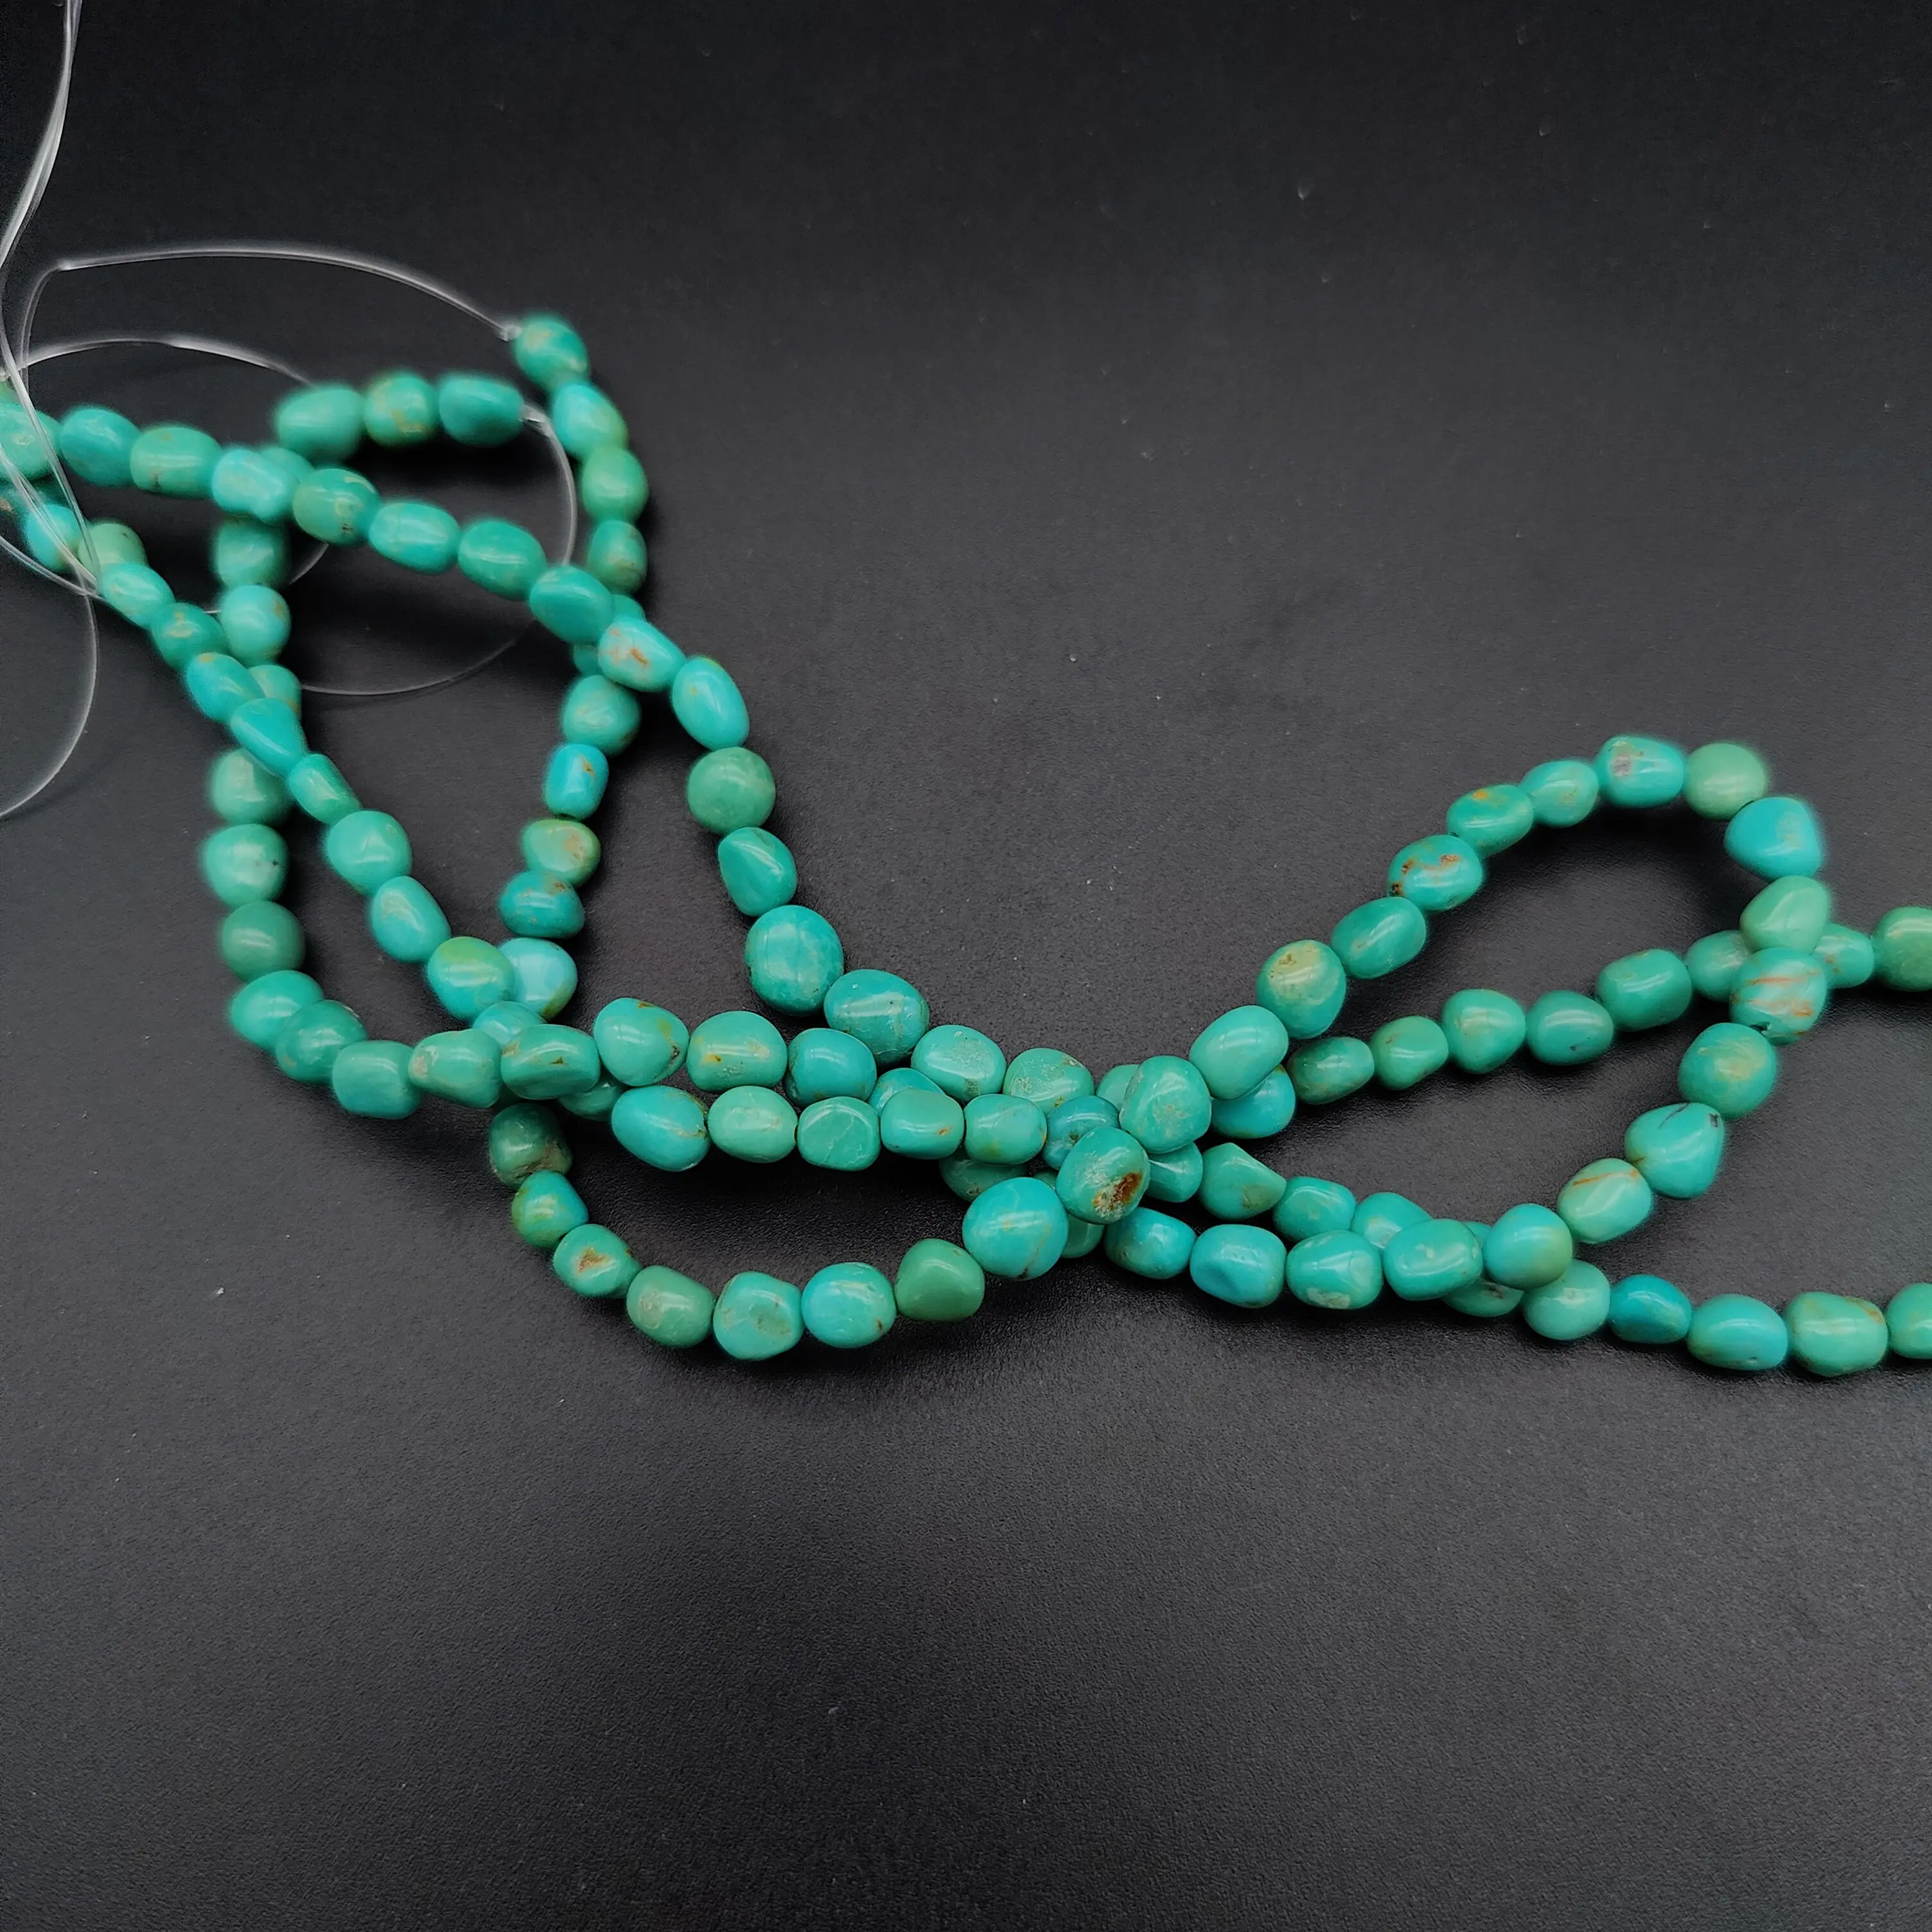 Natural Turquoise Faceted Tumble Nuggets Gemstone Beads Strand from Manufacturer Shop Online Wholesale Dealer Price